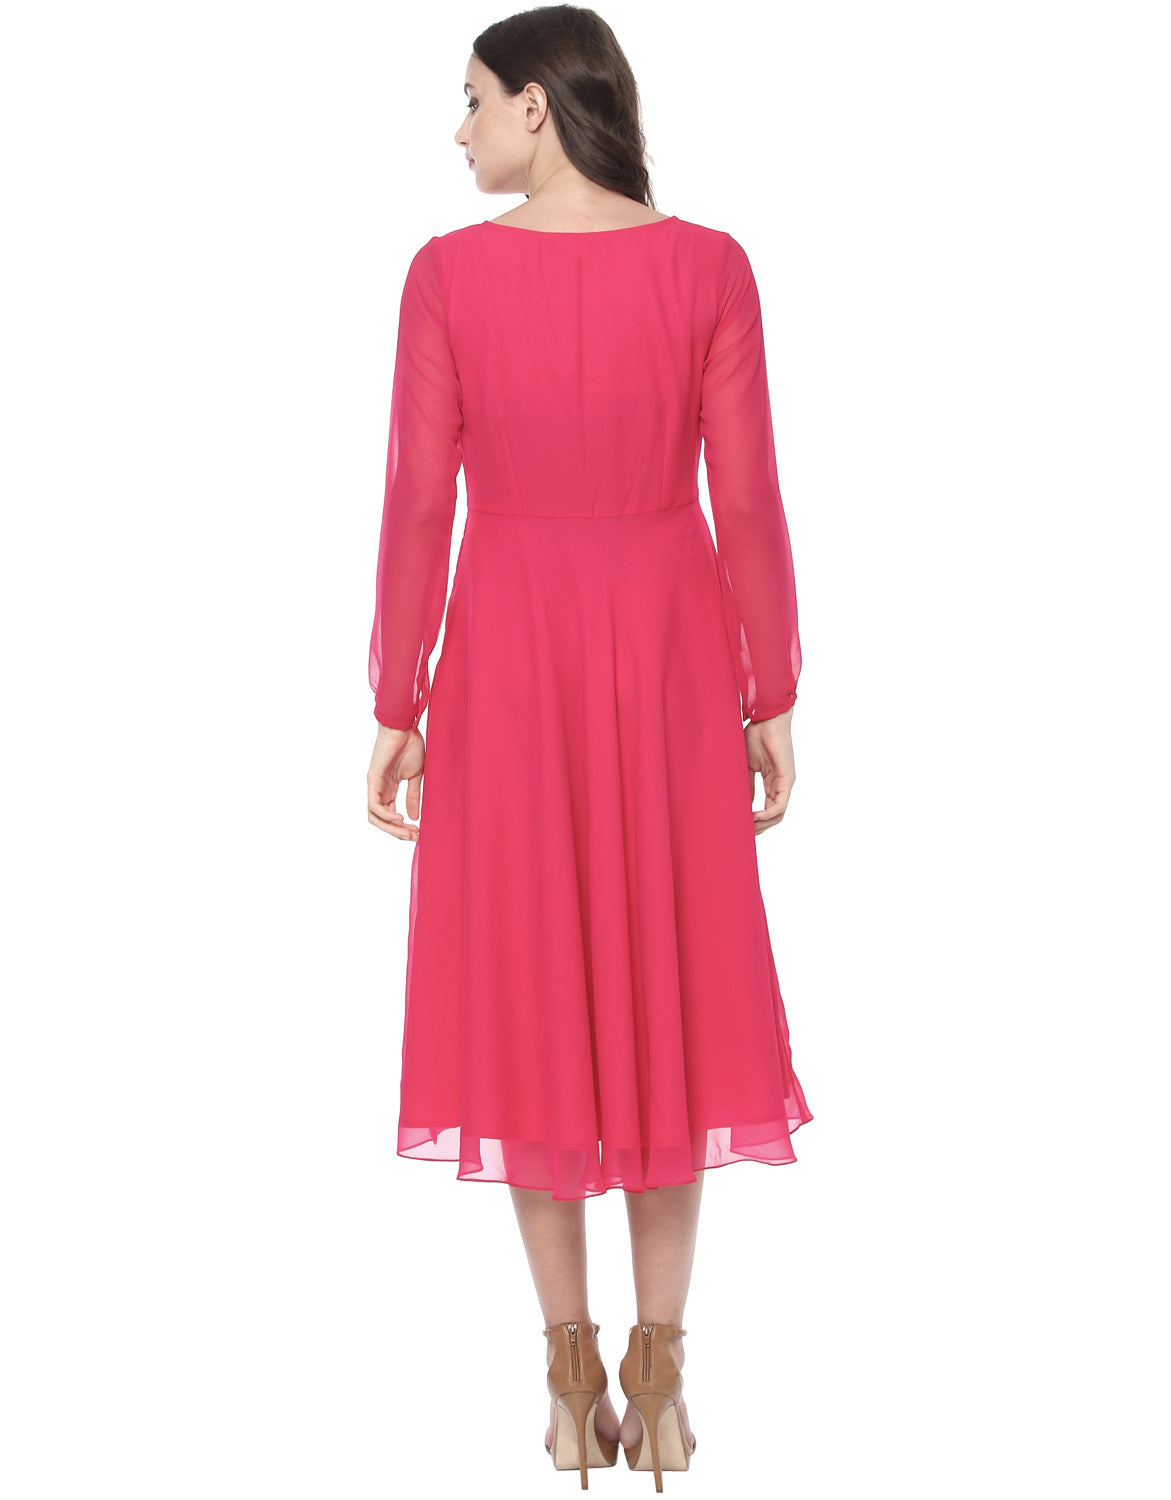 Front Gathered Midi Skater Dress in Pink